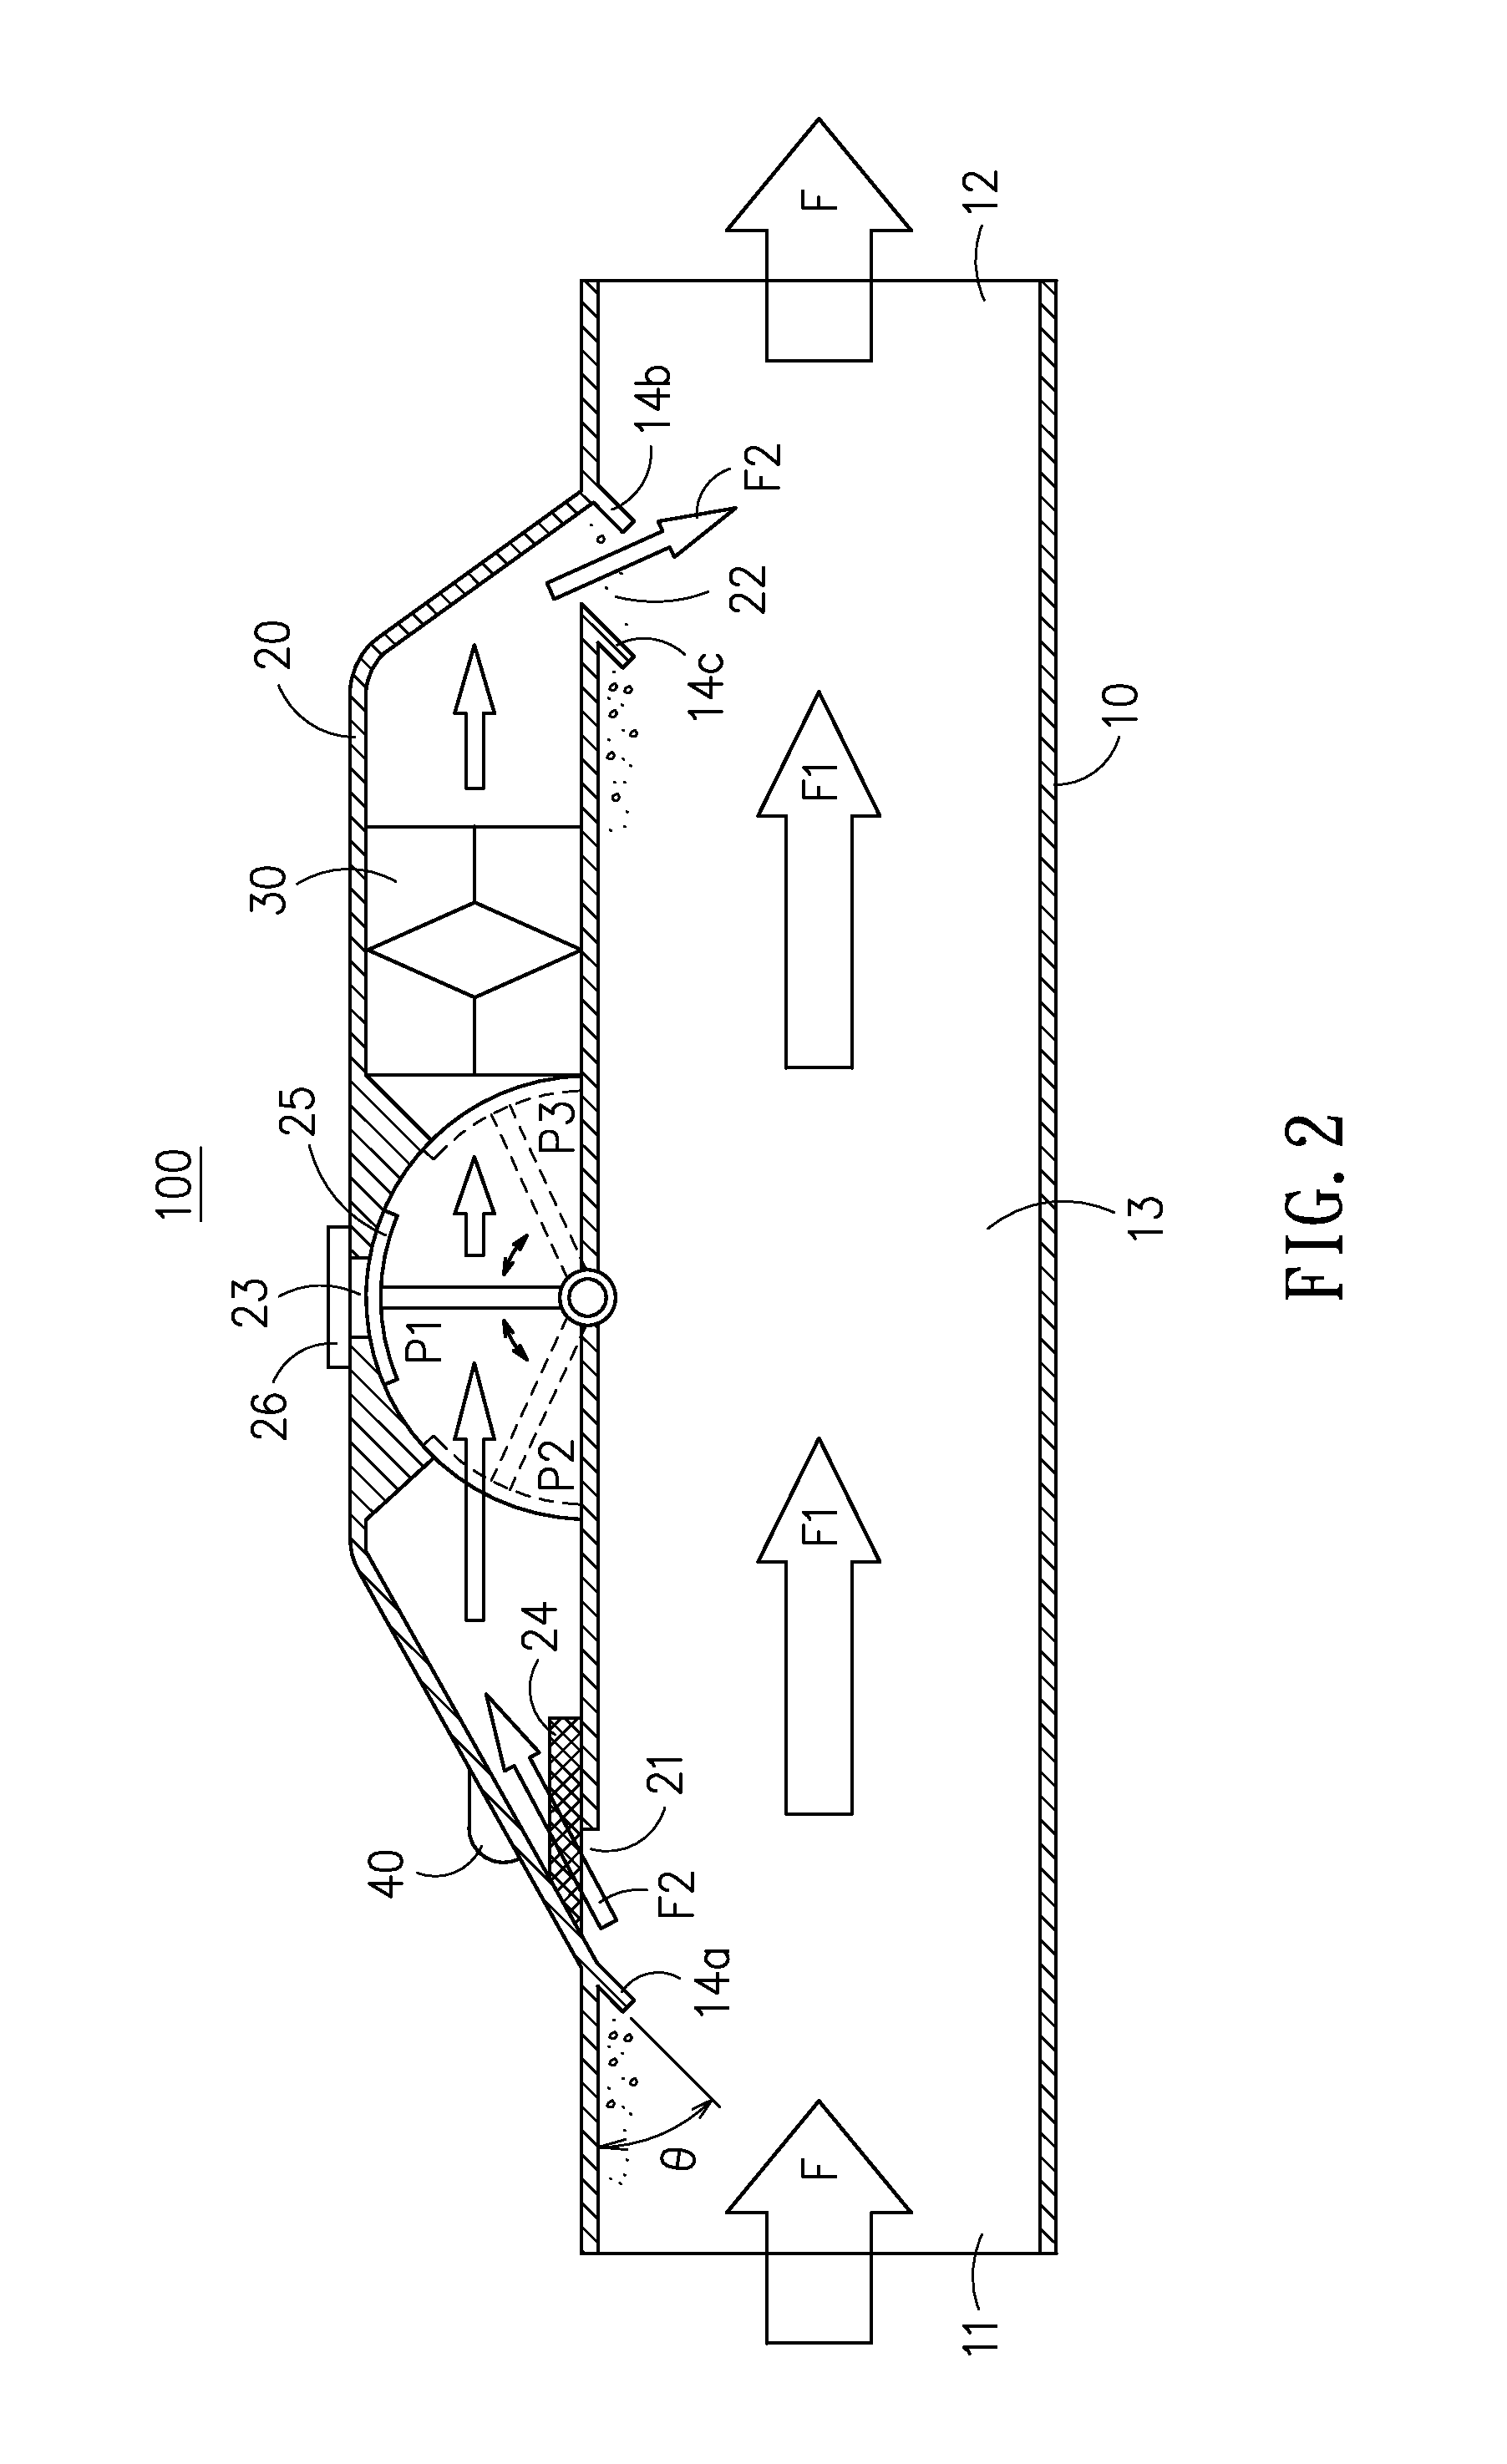 Auxiliary apparatus for better vacuuming effect